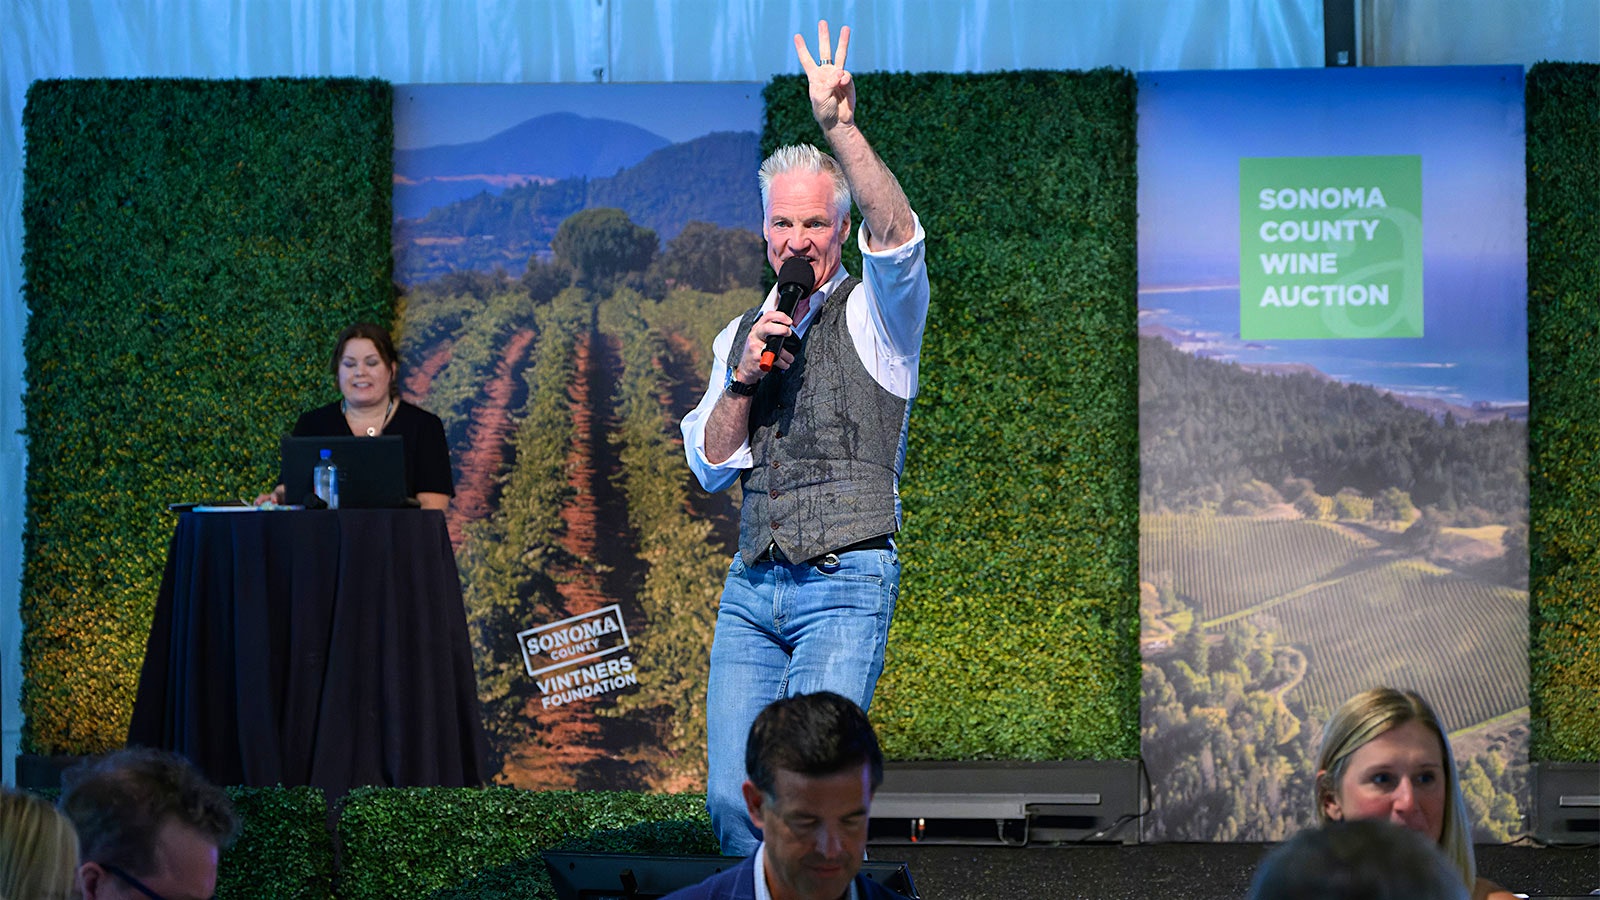  Auctioneer John Curley encouraging bids from the stage at the Sonoma County Wine Auction